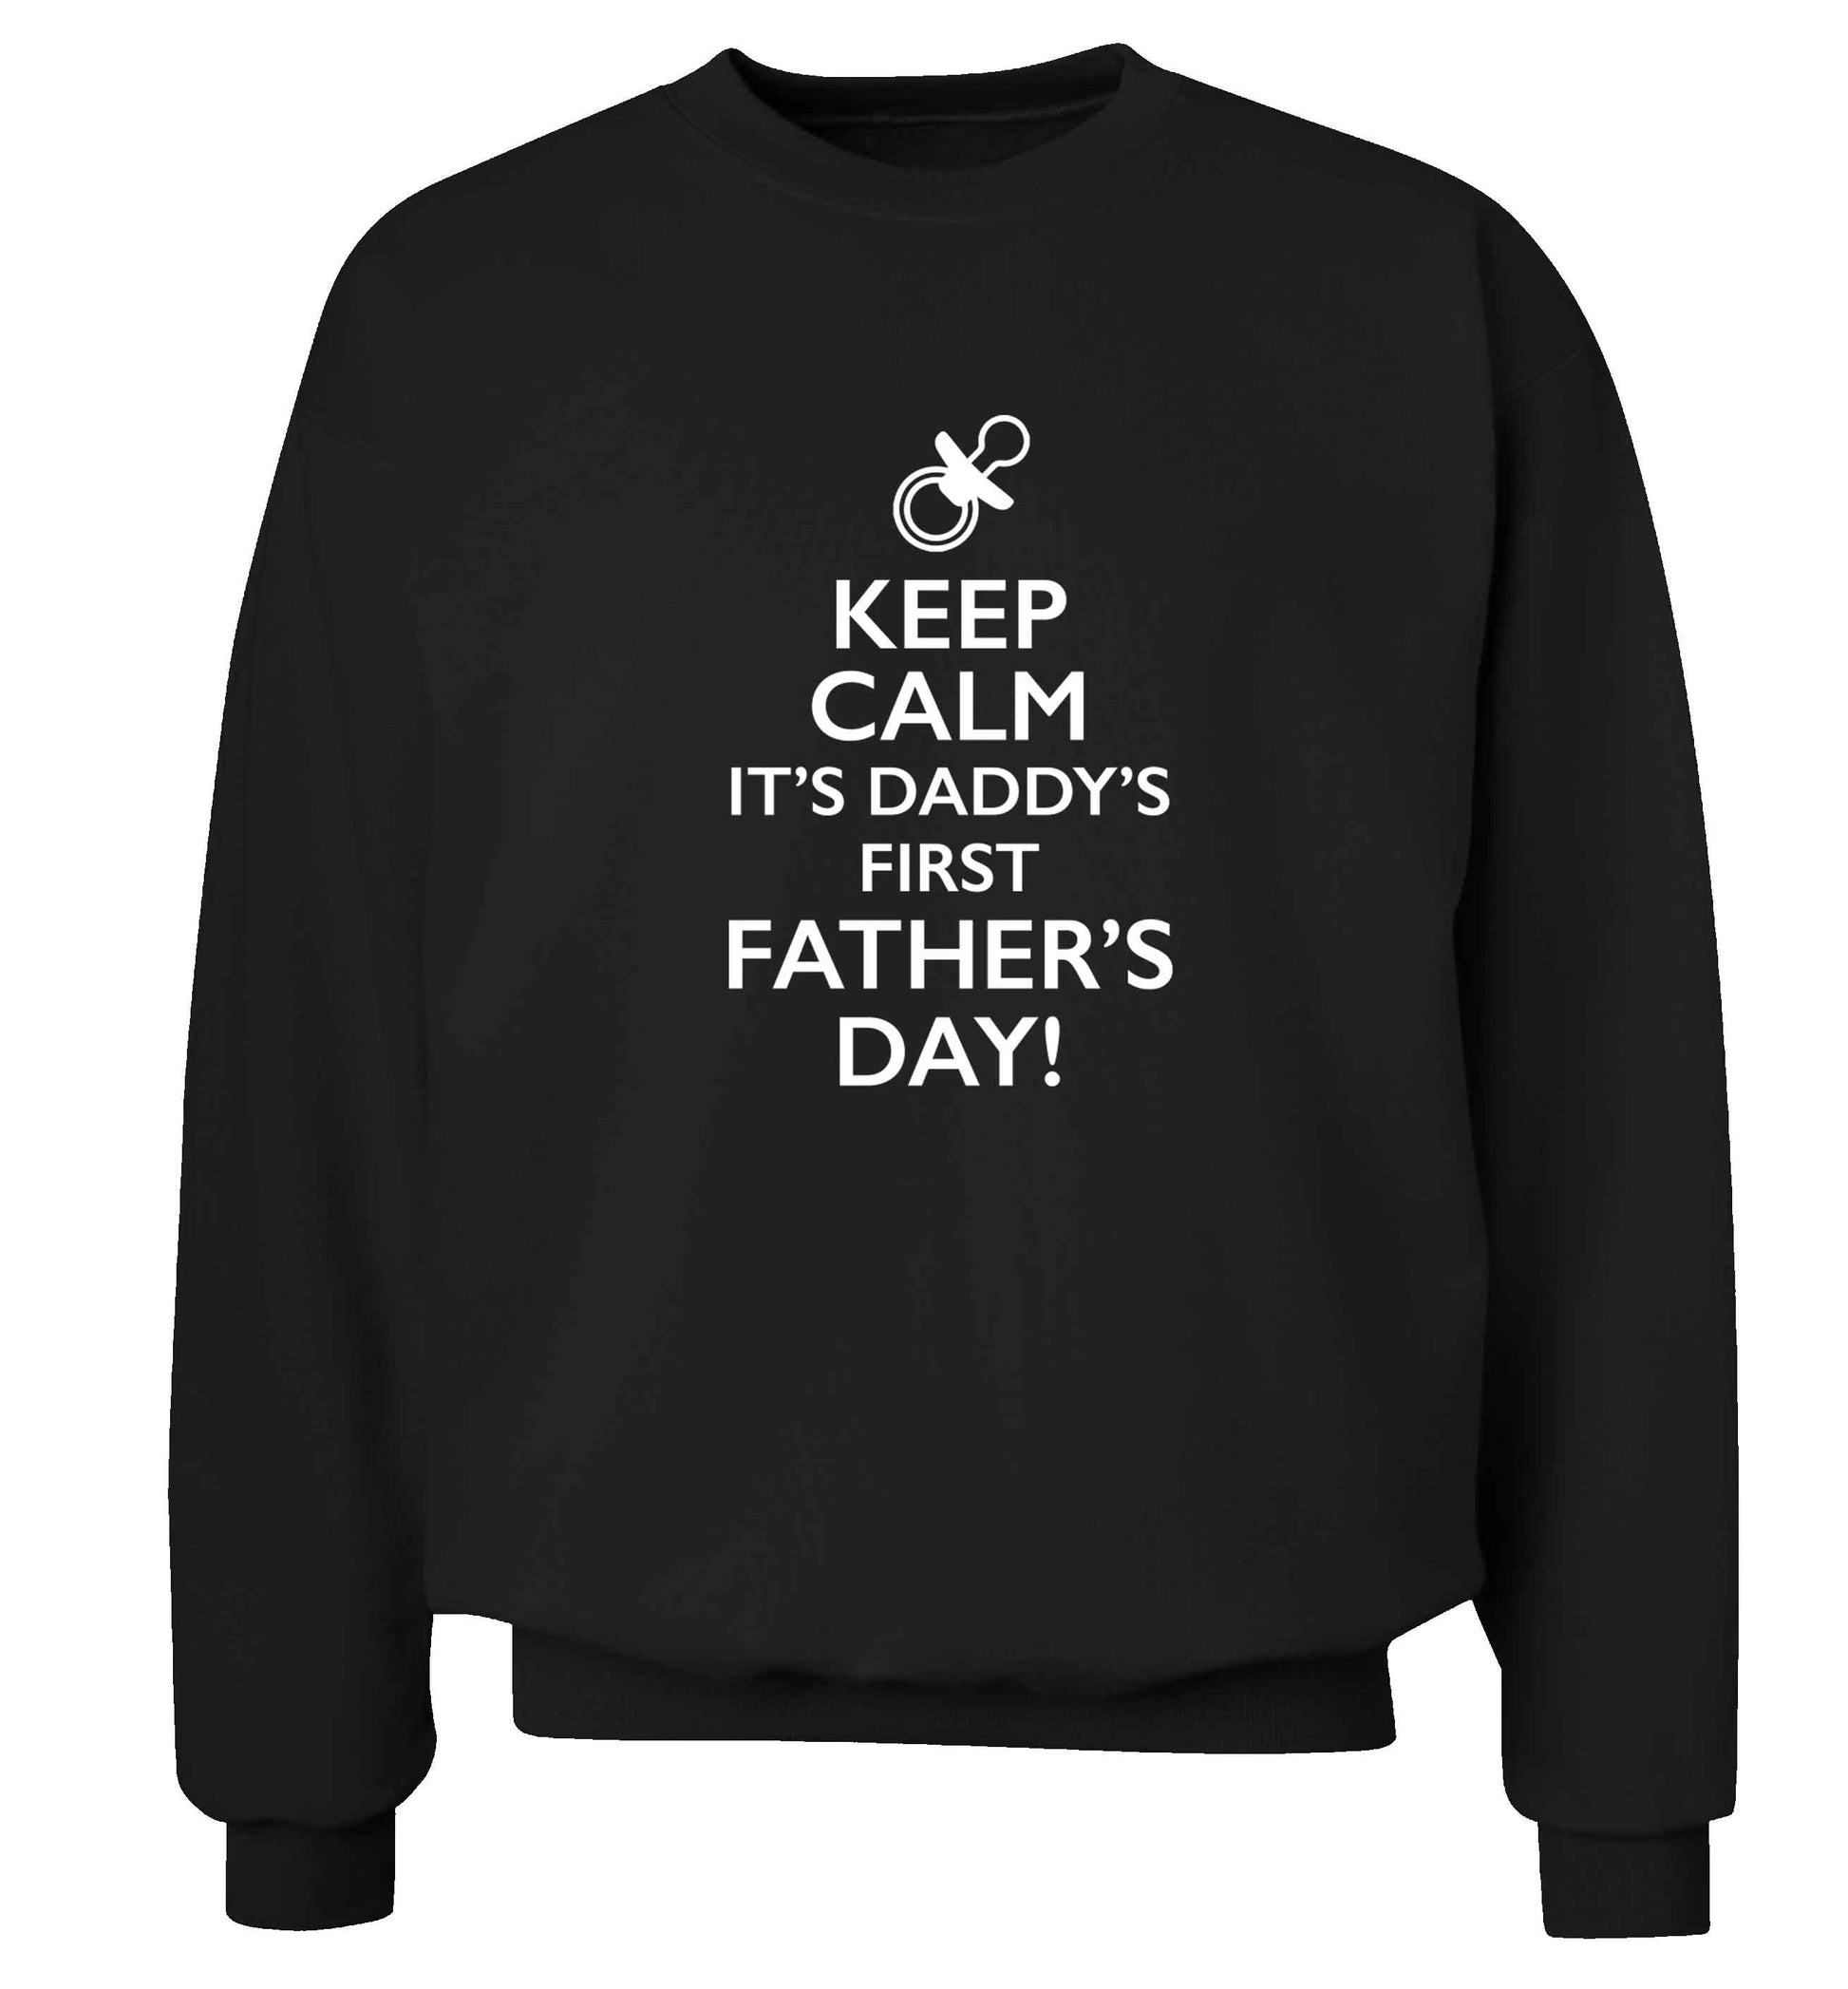 Keep calm it's daddys first father's day adult's unisex black sweater 2XL